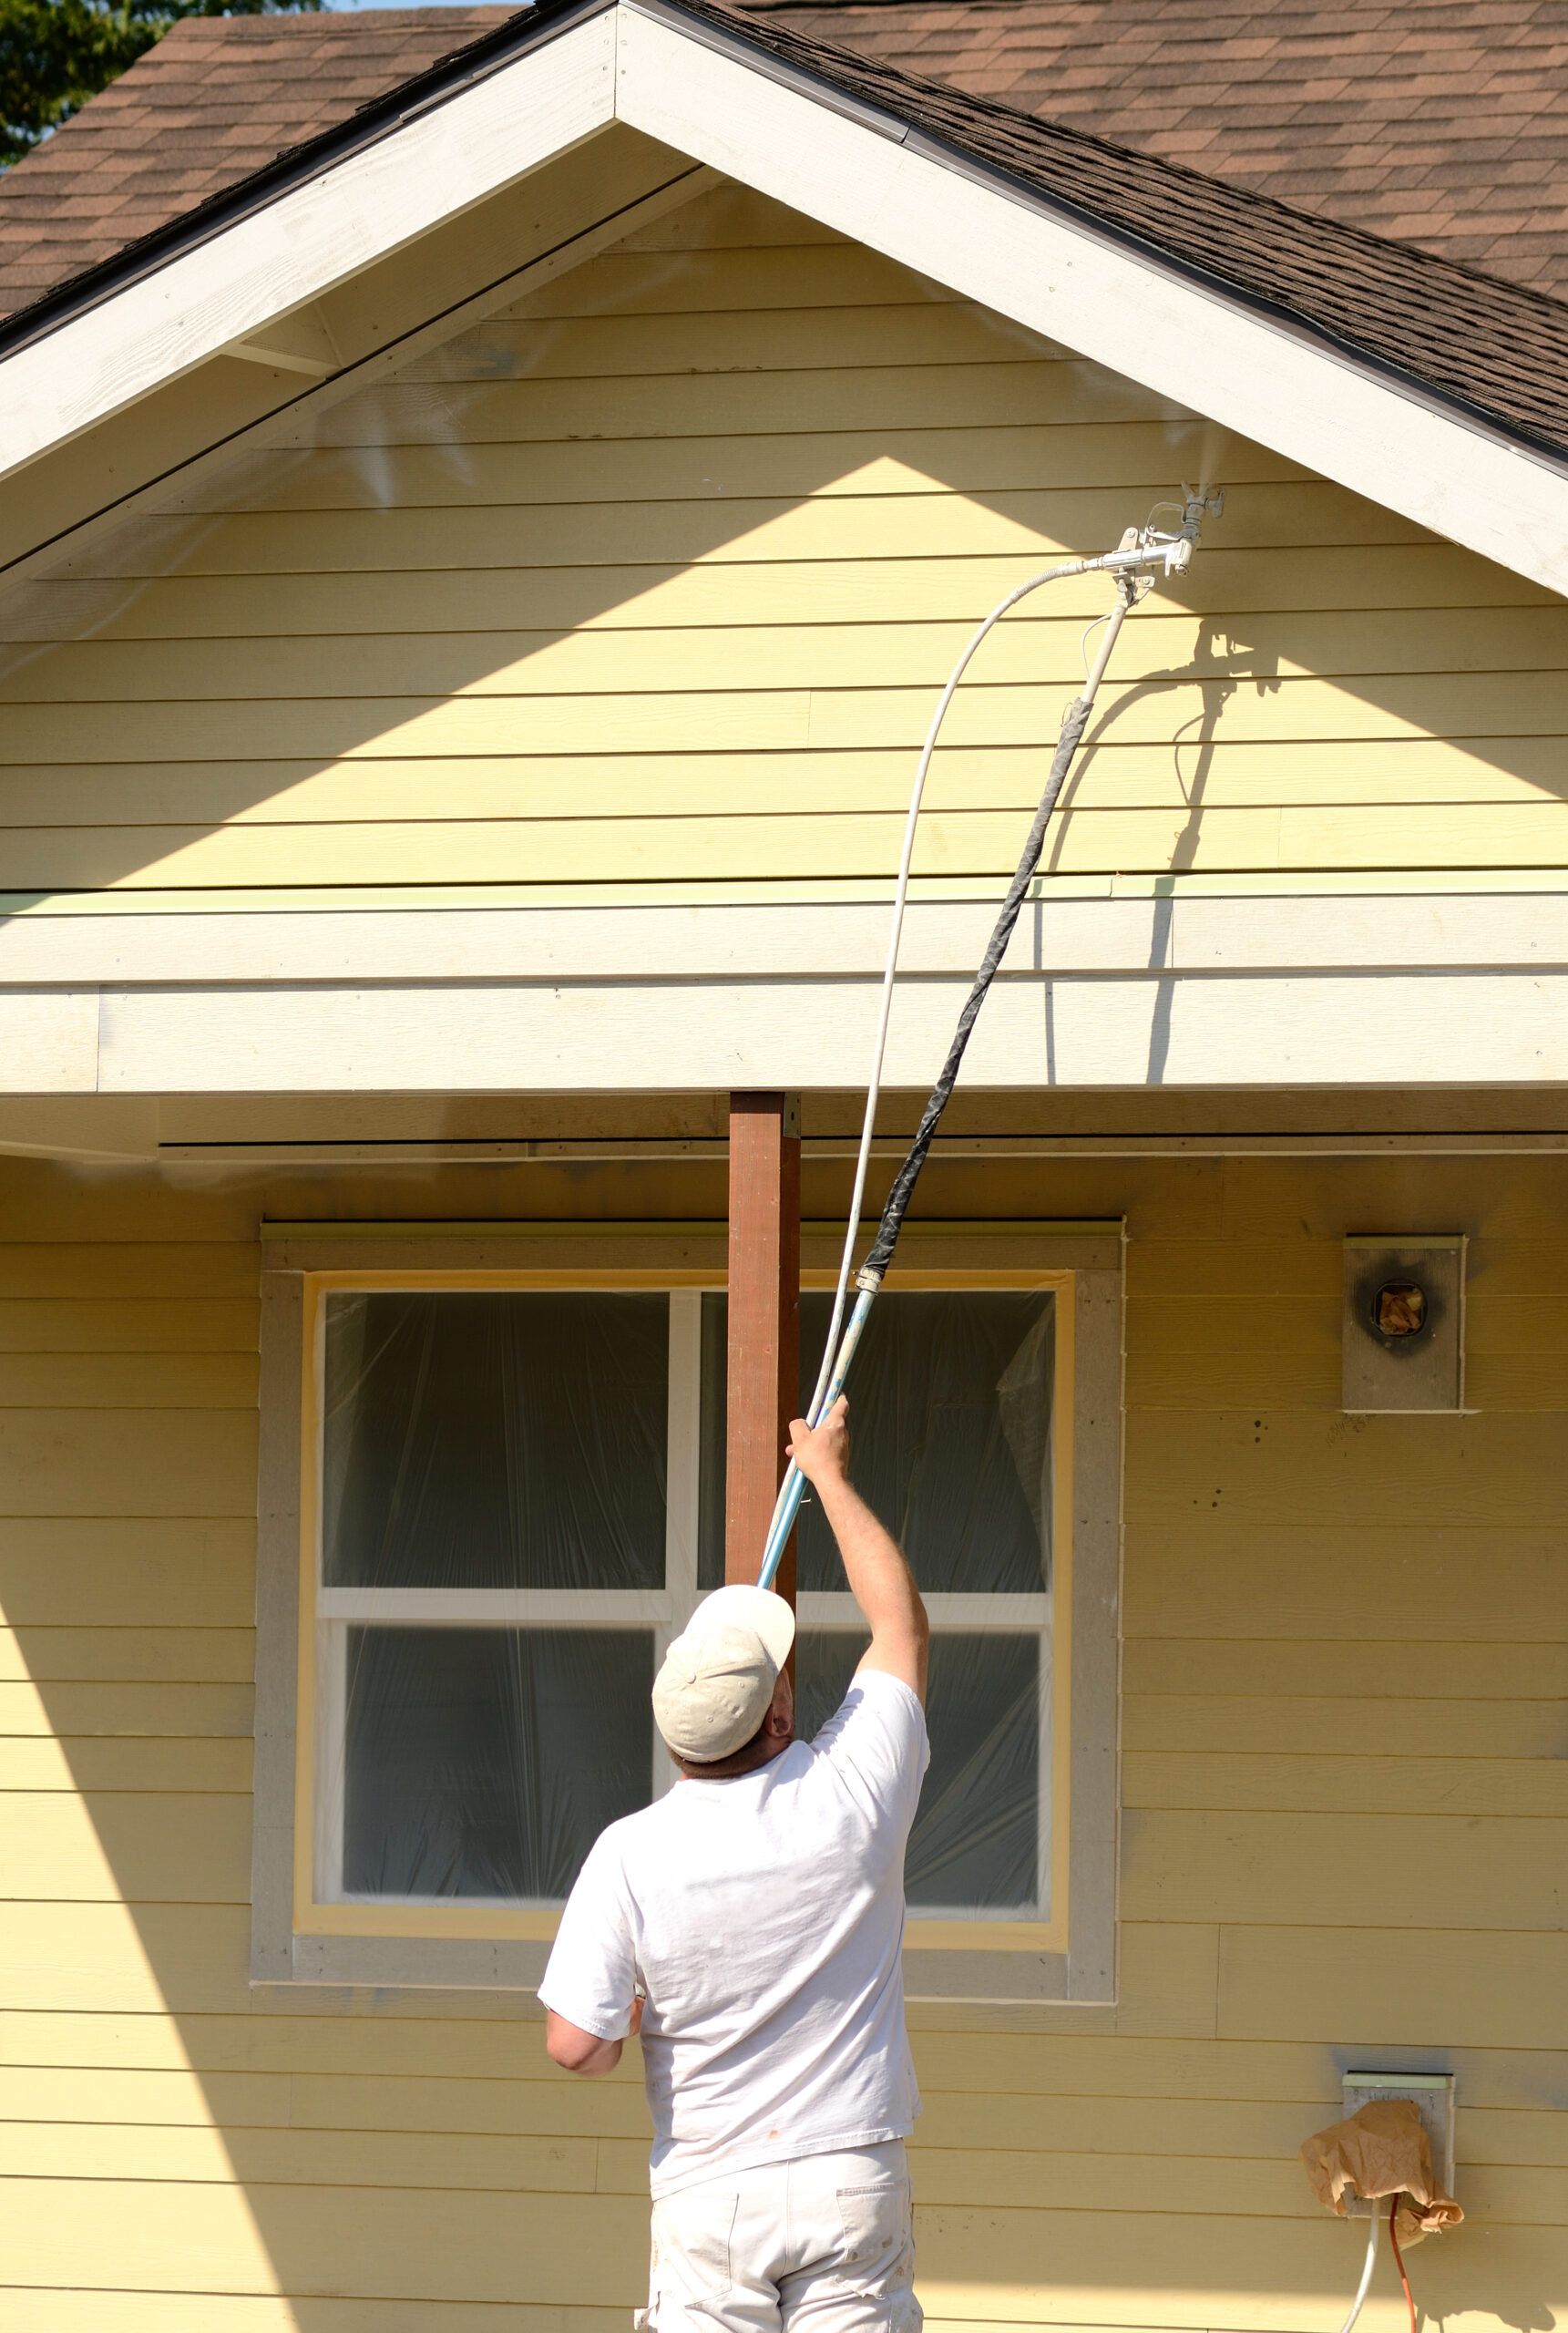 How To Spray Paint Your House's Exterior With An Airless Sprayer